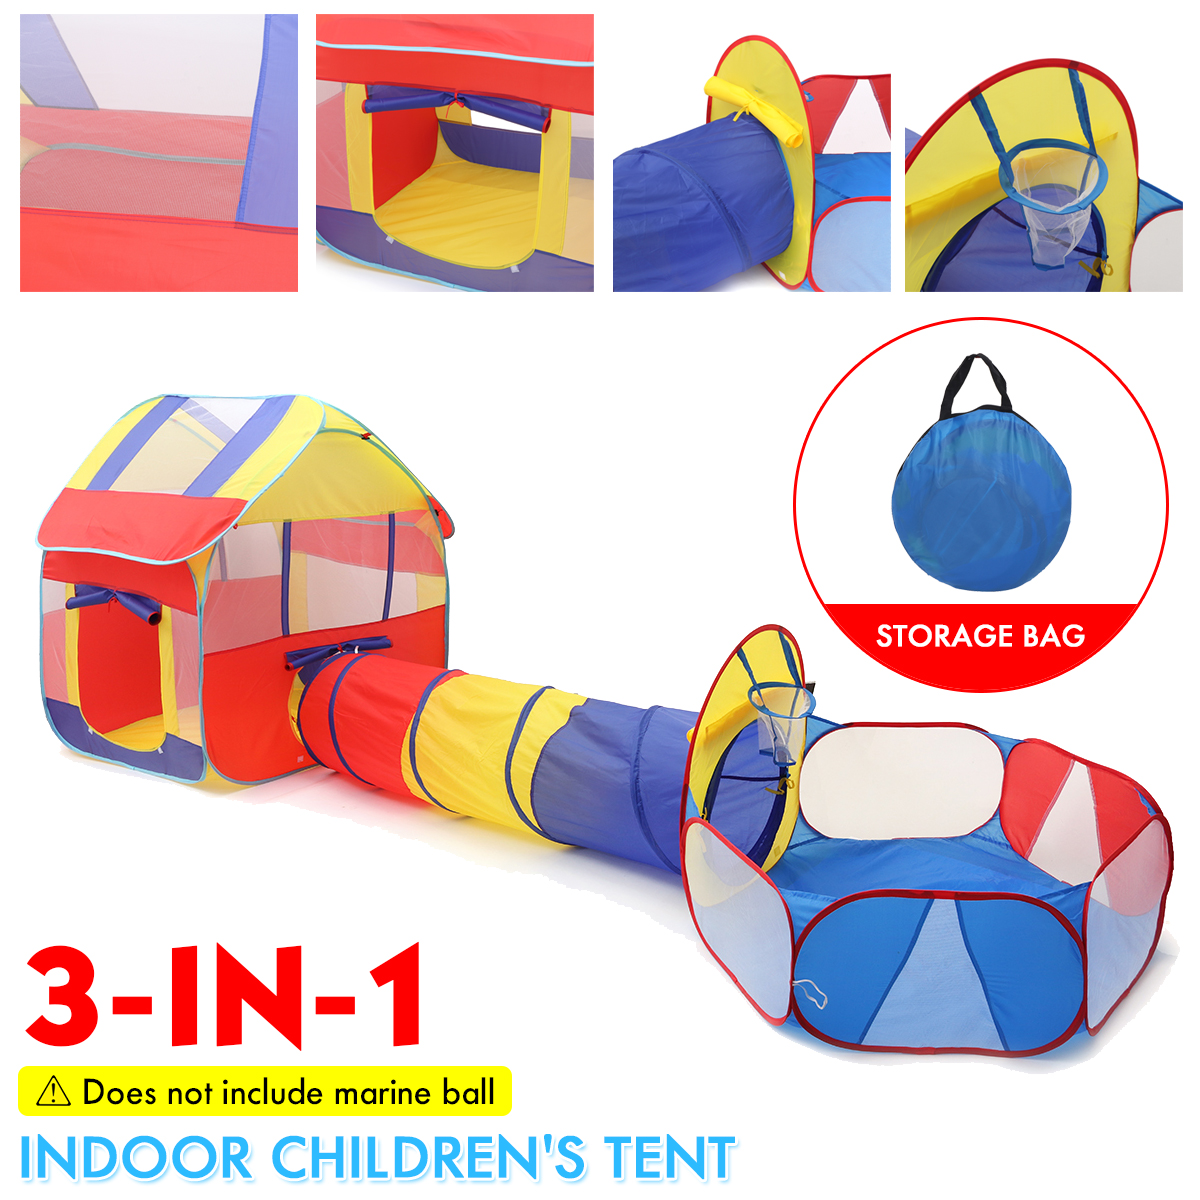 3-IN-1-Indoor-Outdoor-Triangle-and-Hexagon-Detachable-Tent-Childrens-Play-Toys-with-Zippered-Storage-1707047-2